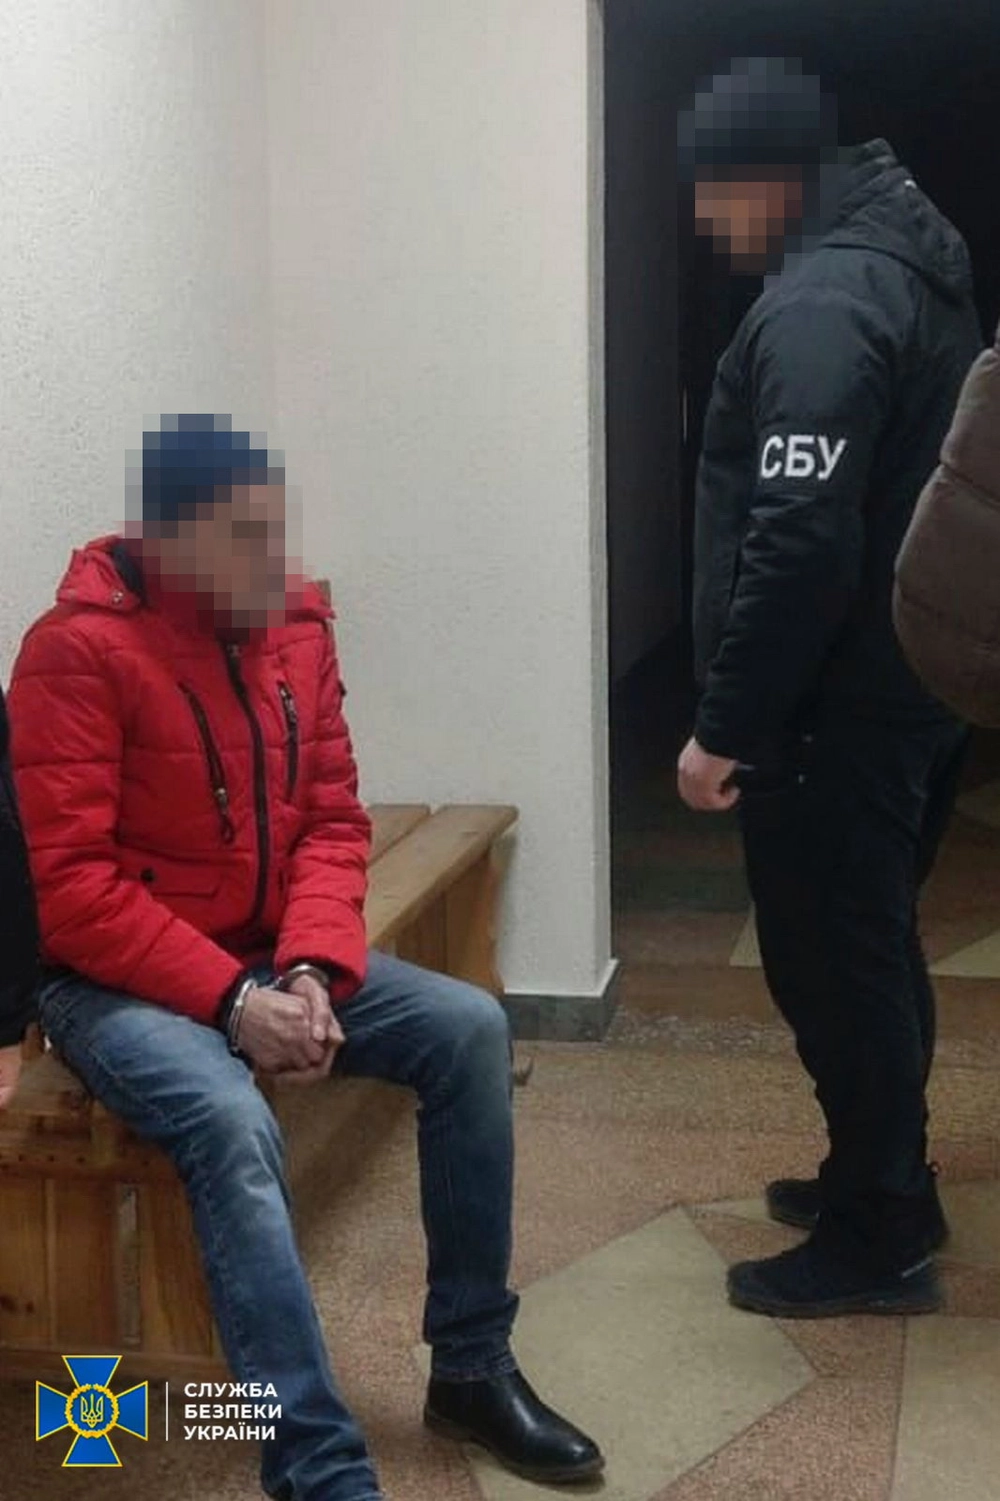 He wanted to escape to the occupiers: law enforcement detained a collaborator who was spying on the Armed Forces during the occupation of Kharkiv region